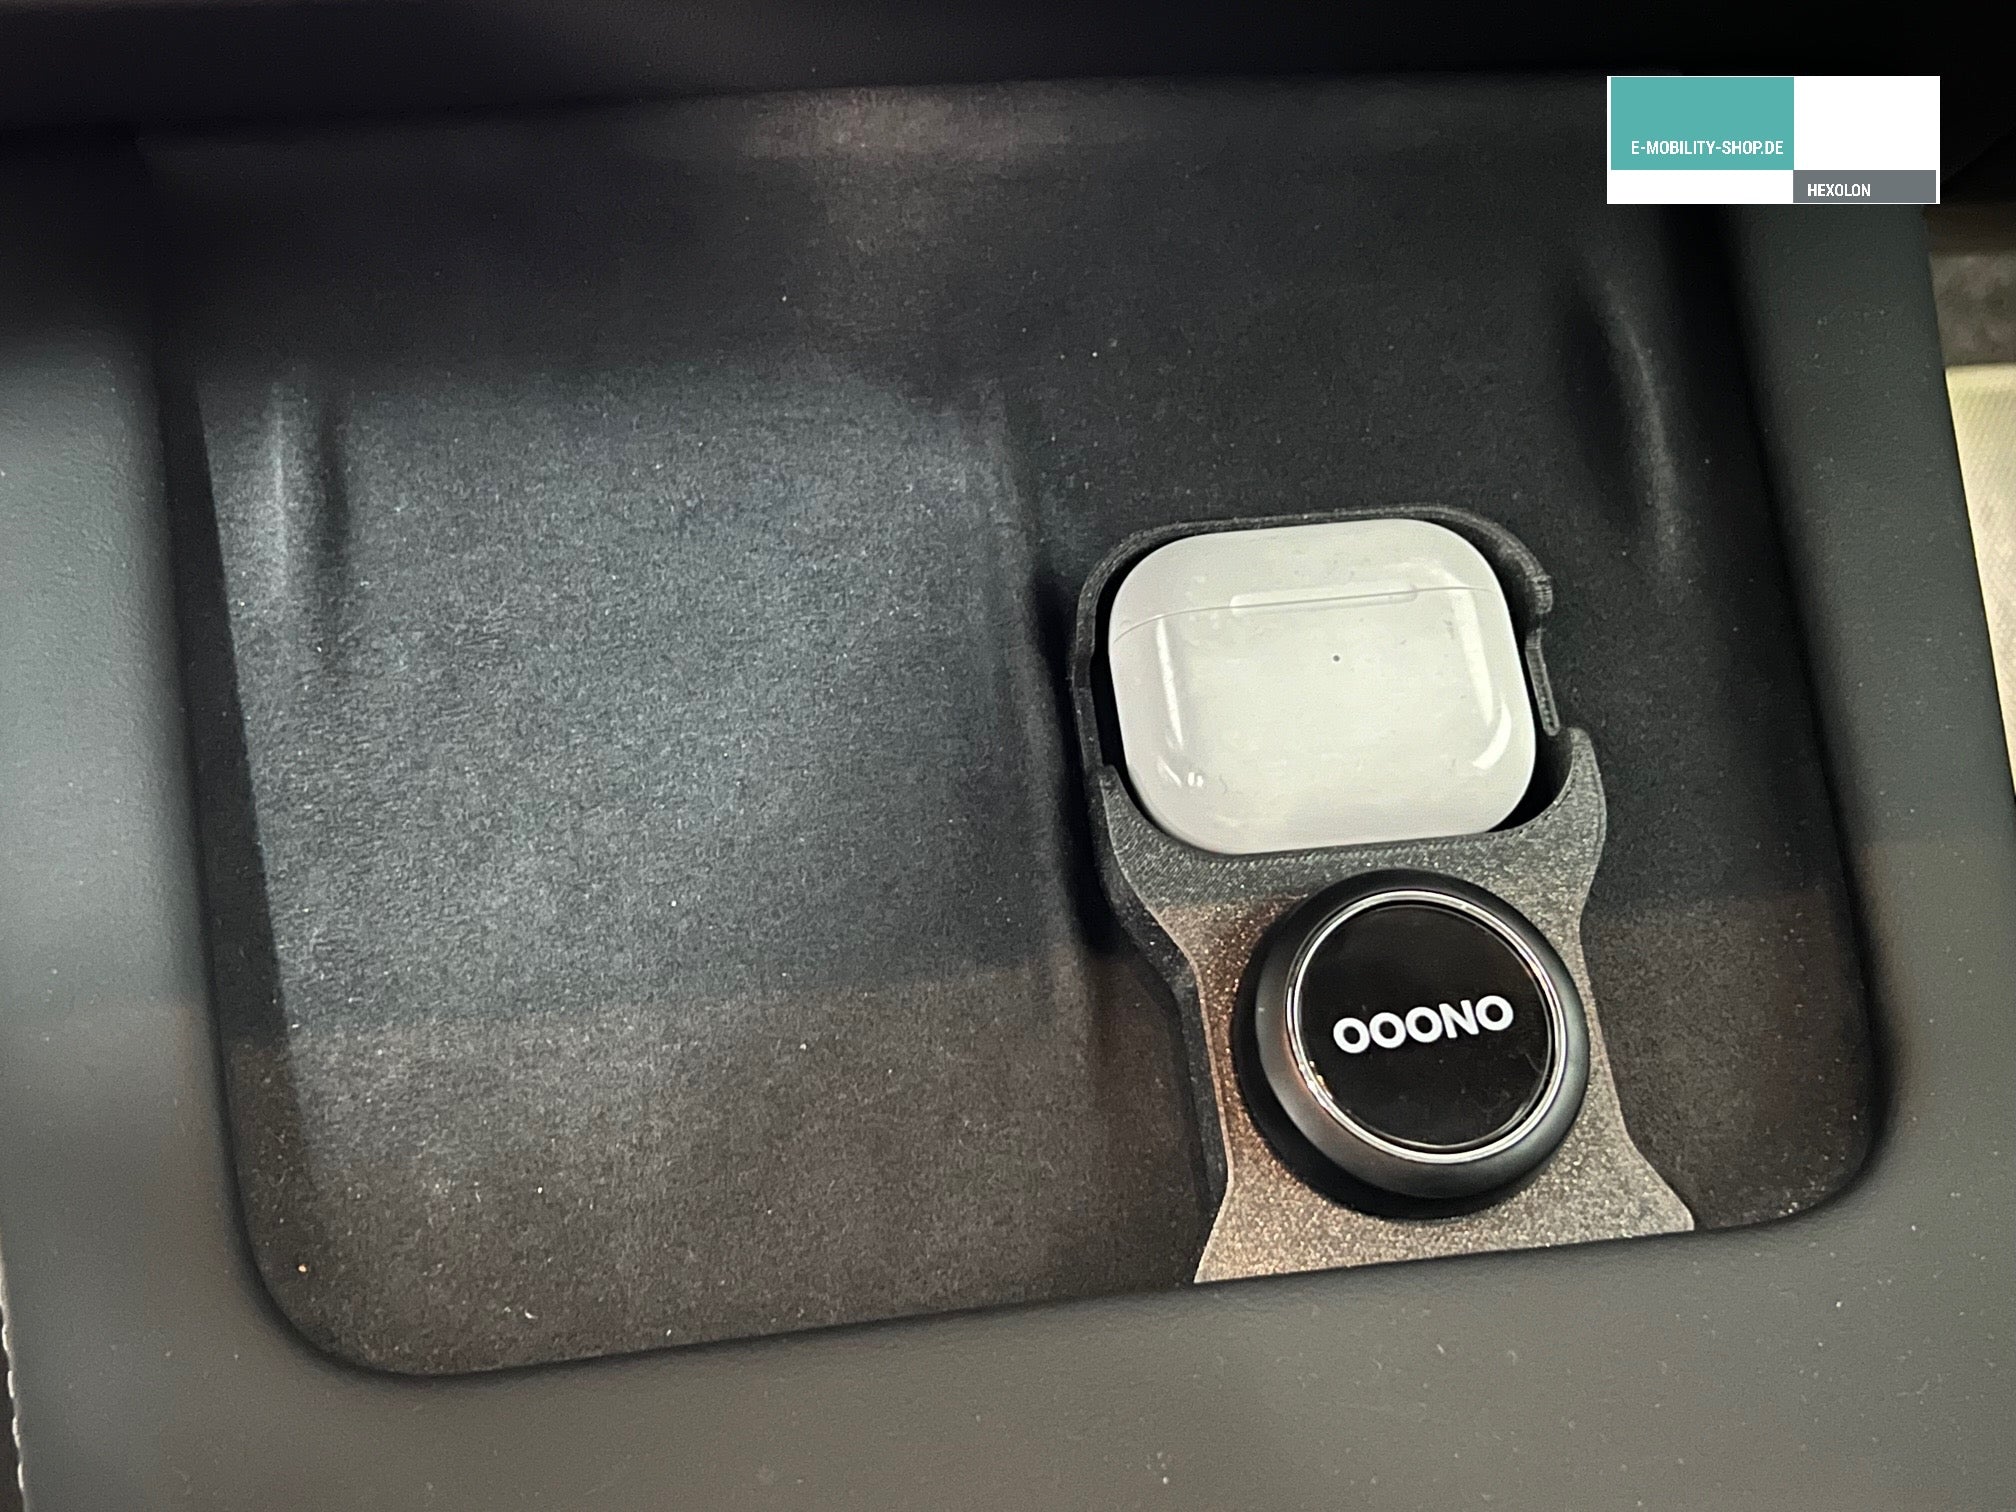 AirPods holder for the inductive charging cradle in the Tesla with